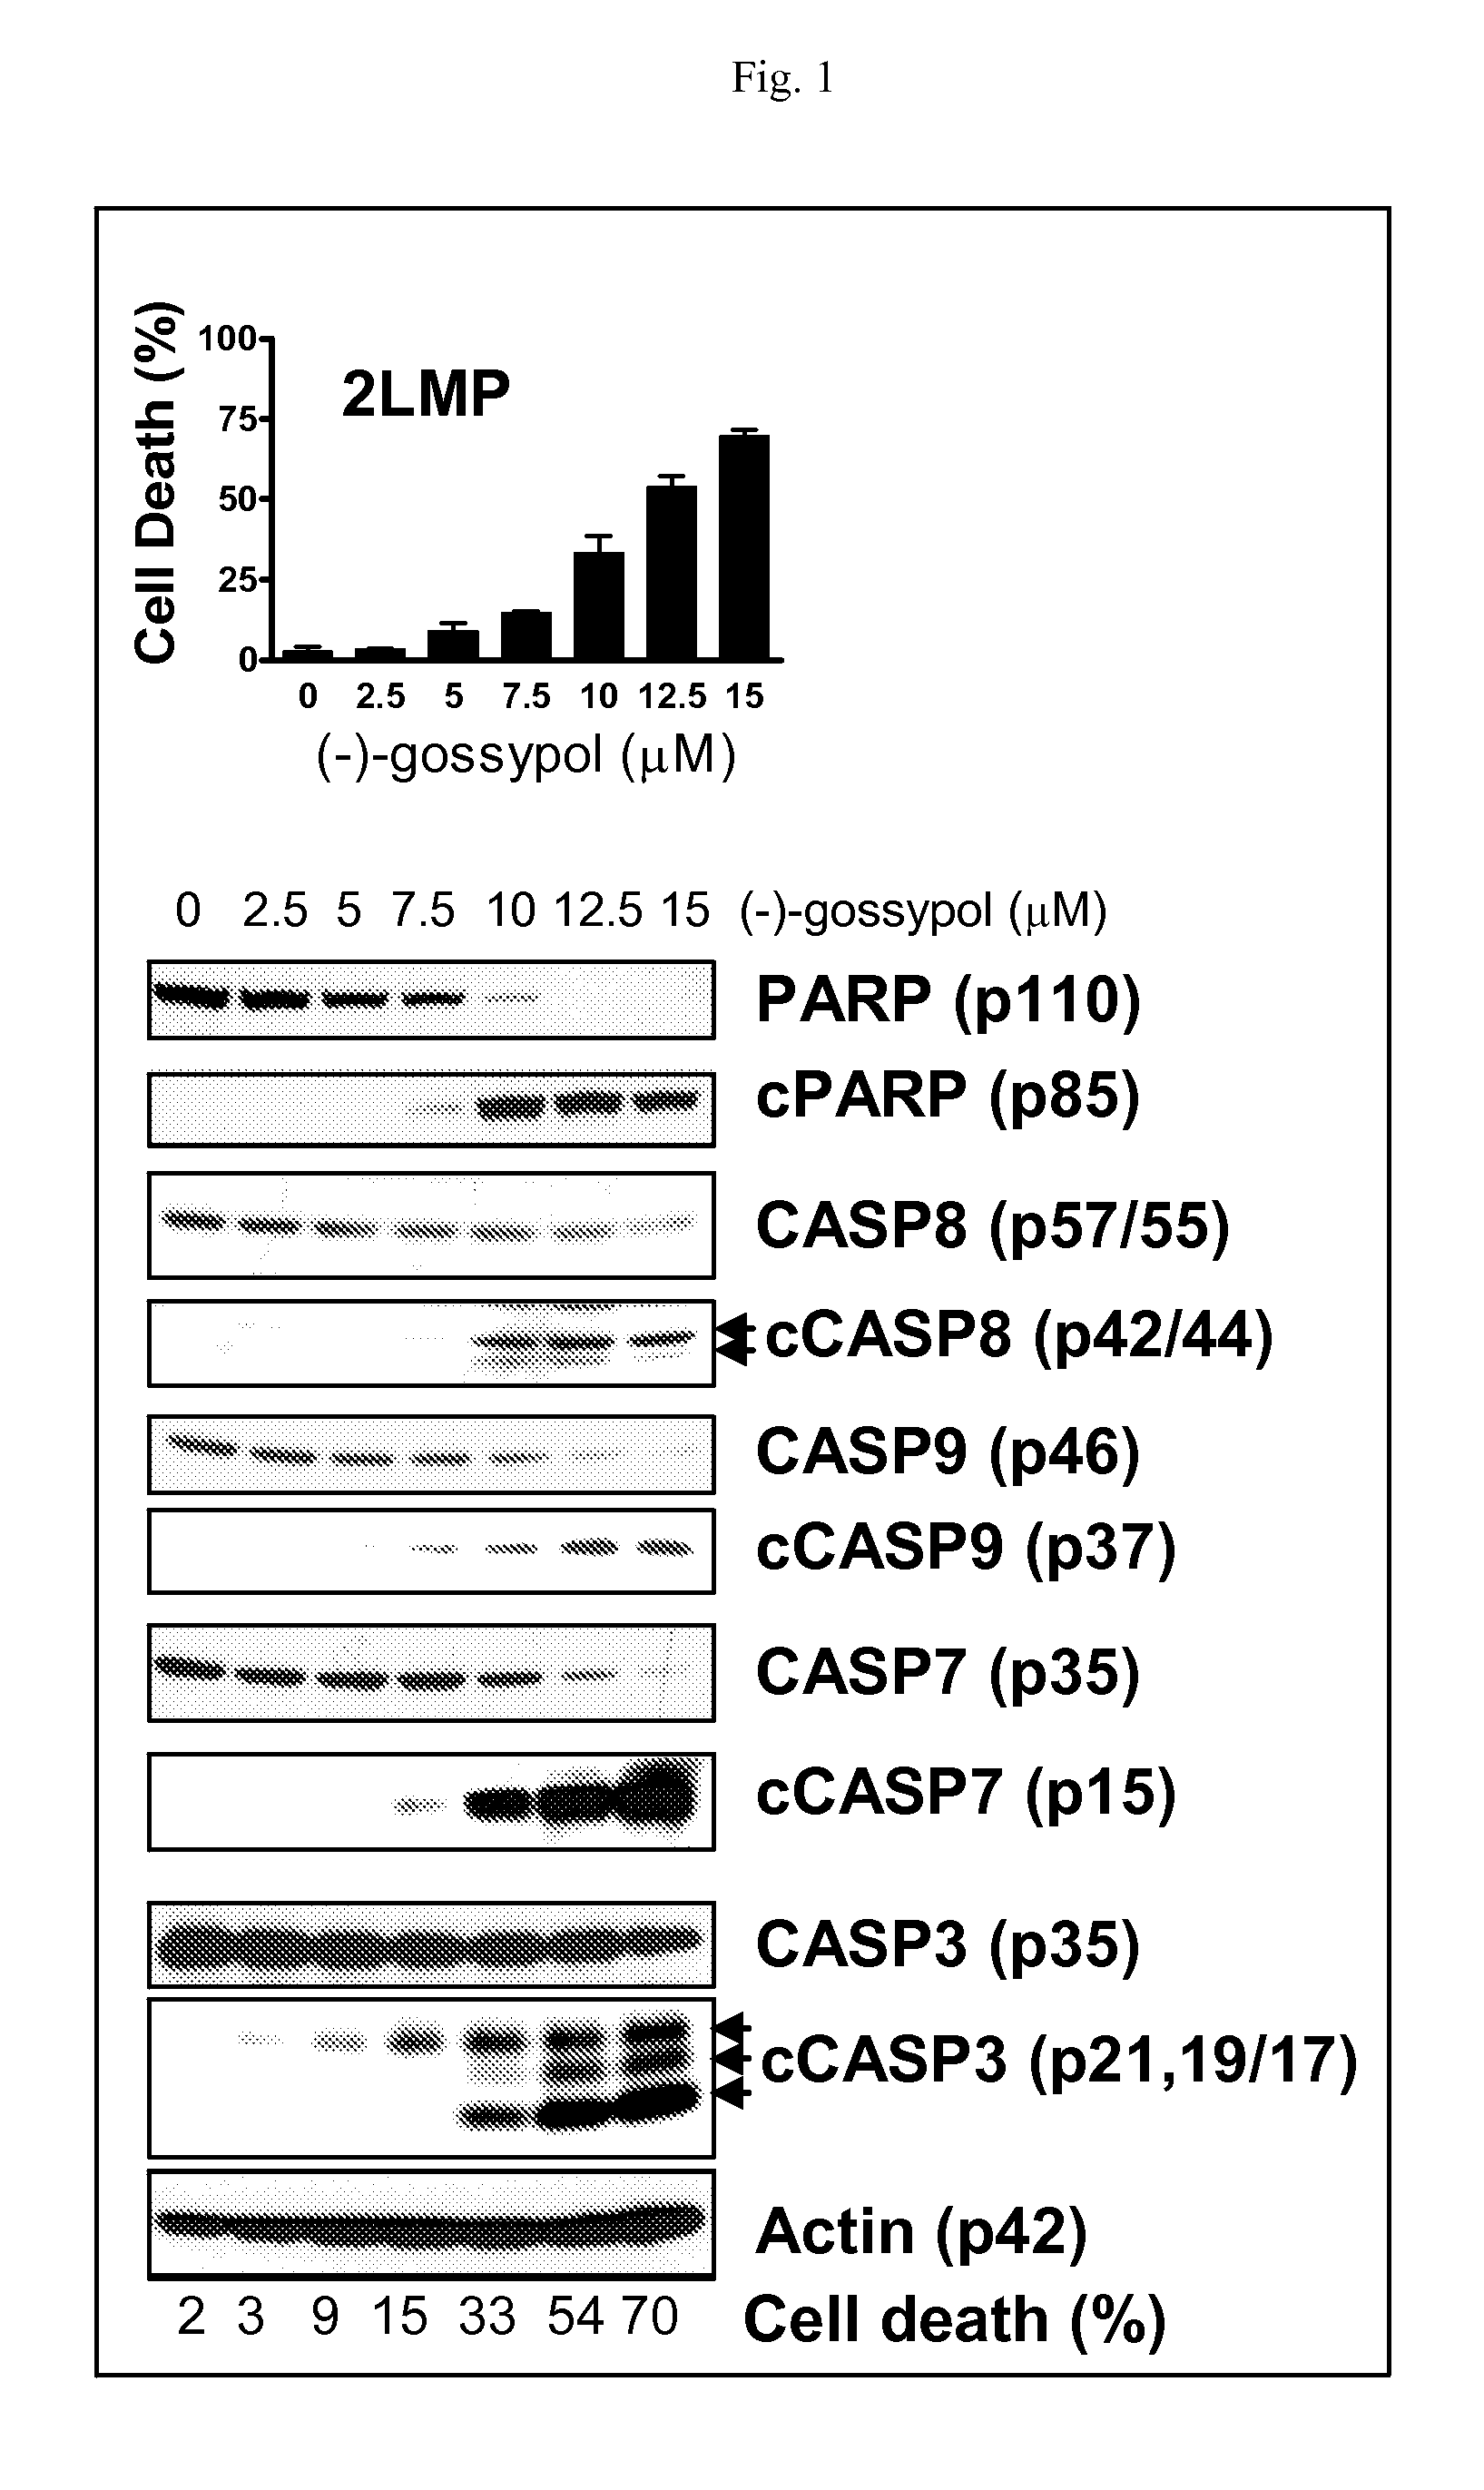 Biomarkers for gossypol chemotherapy and methods of treating disease